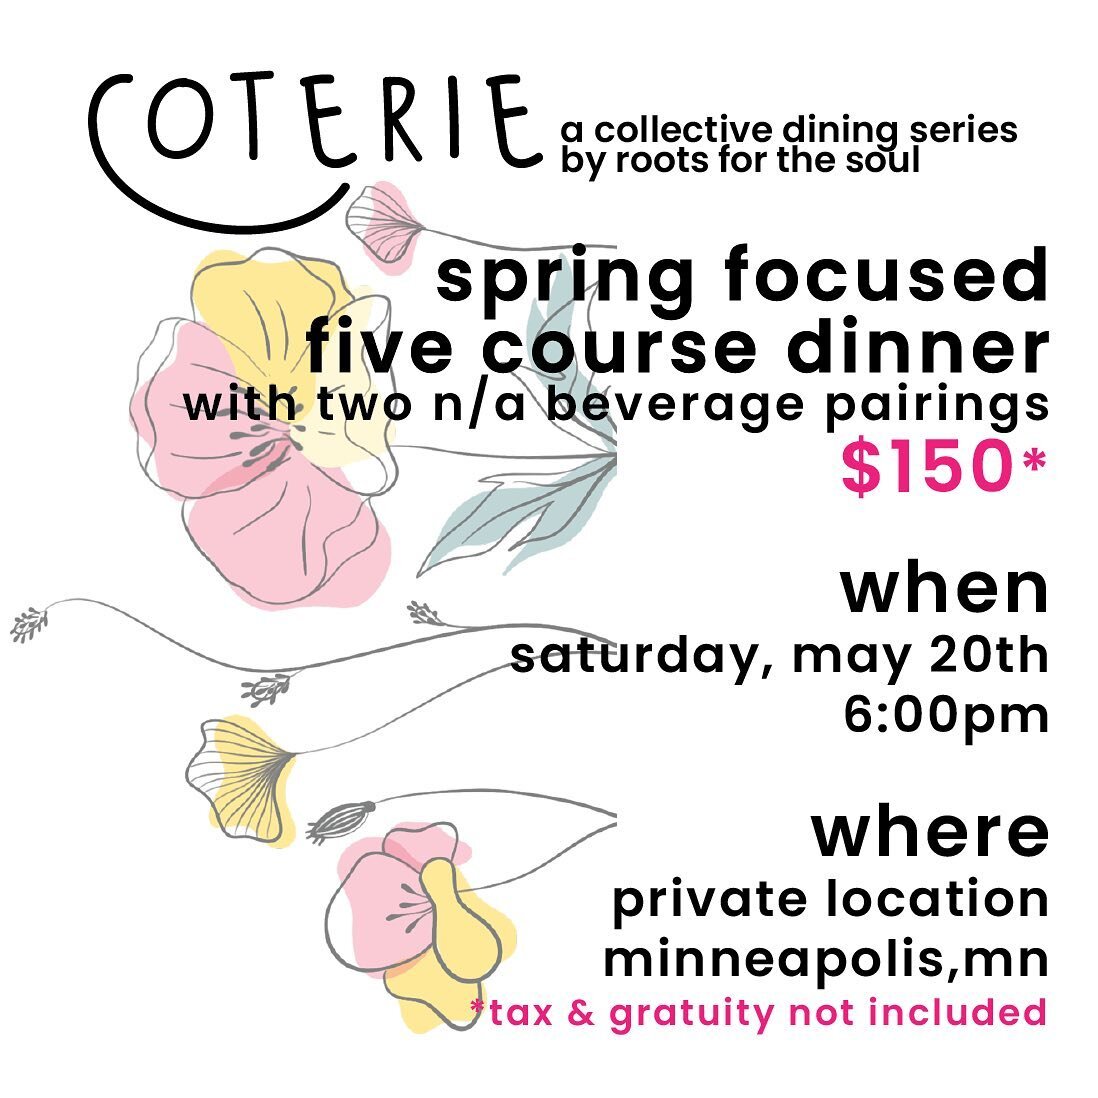 Allow us to reintroduce you all to Coterie, a collective dining series by Roots for the Soul. Our team has been working meticulously to curate this five course in-person dinner showcasing the flavors of Spring.

We all know Minnesota Spring is unpred